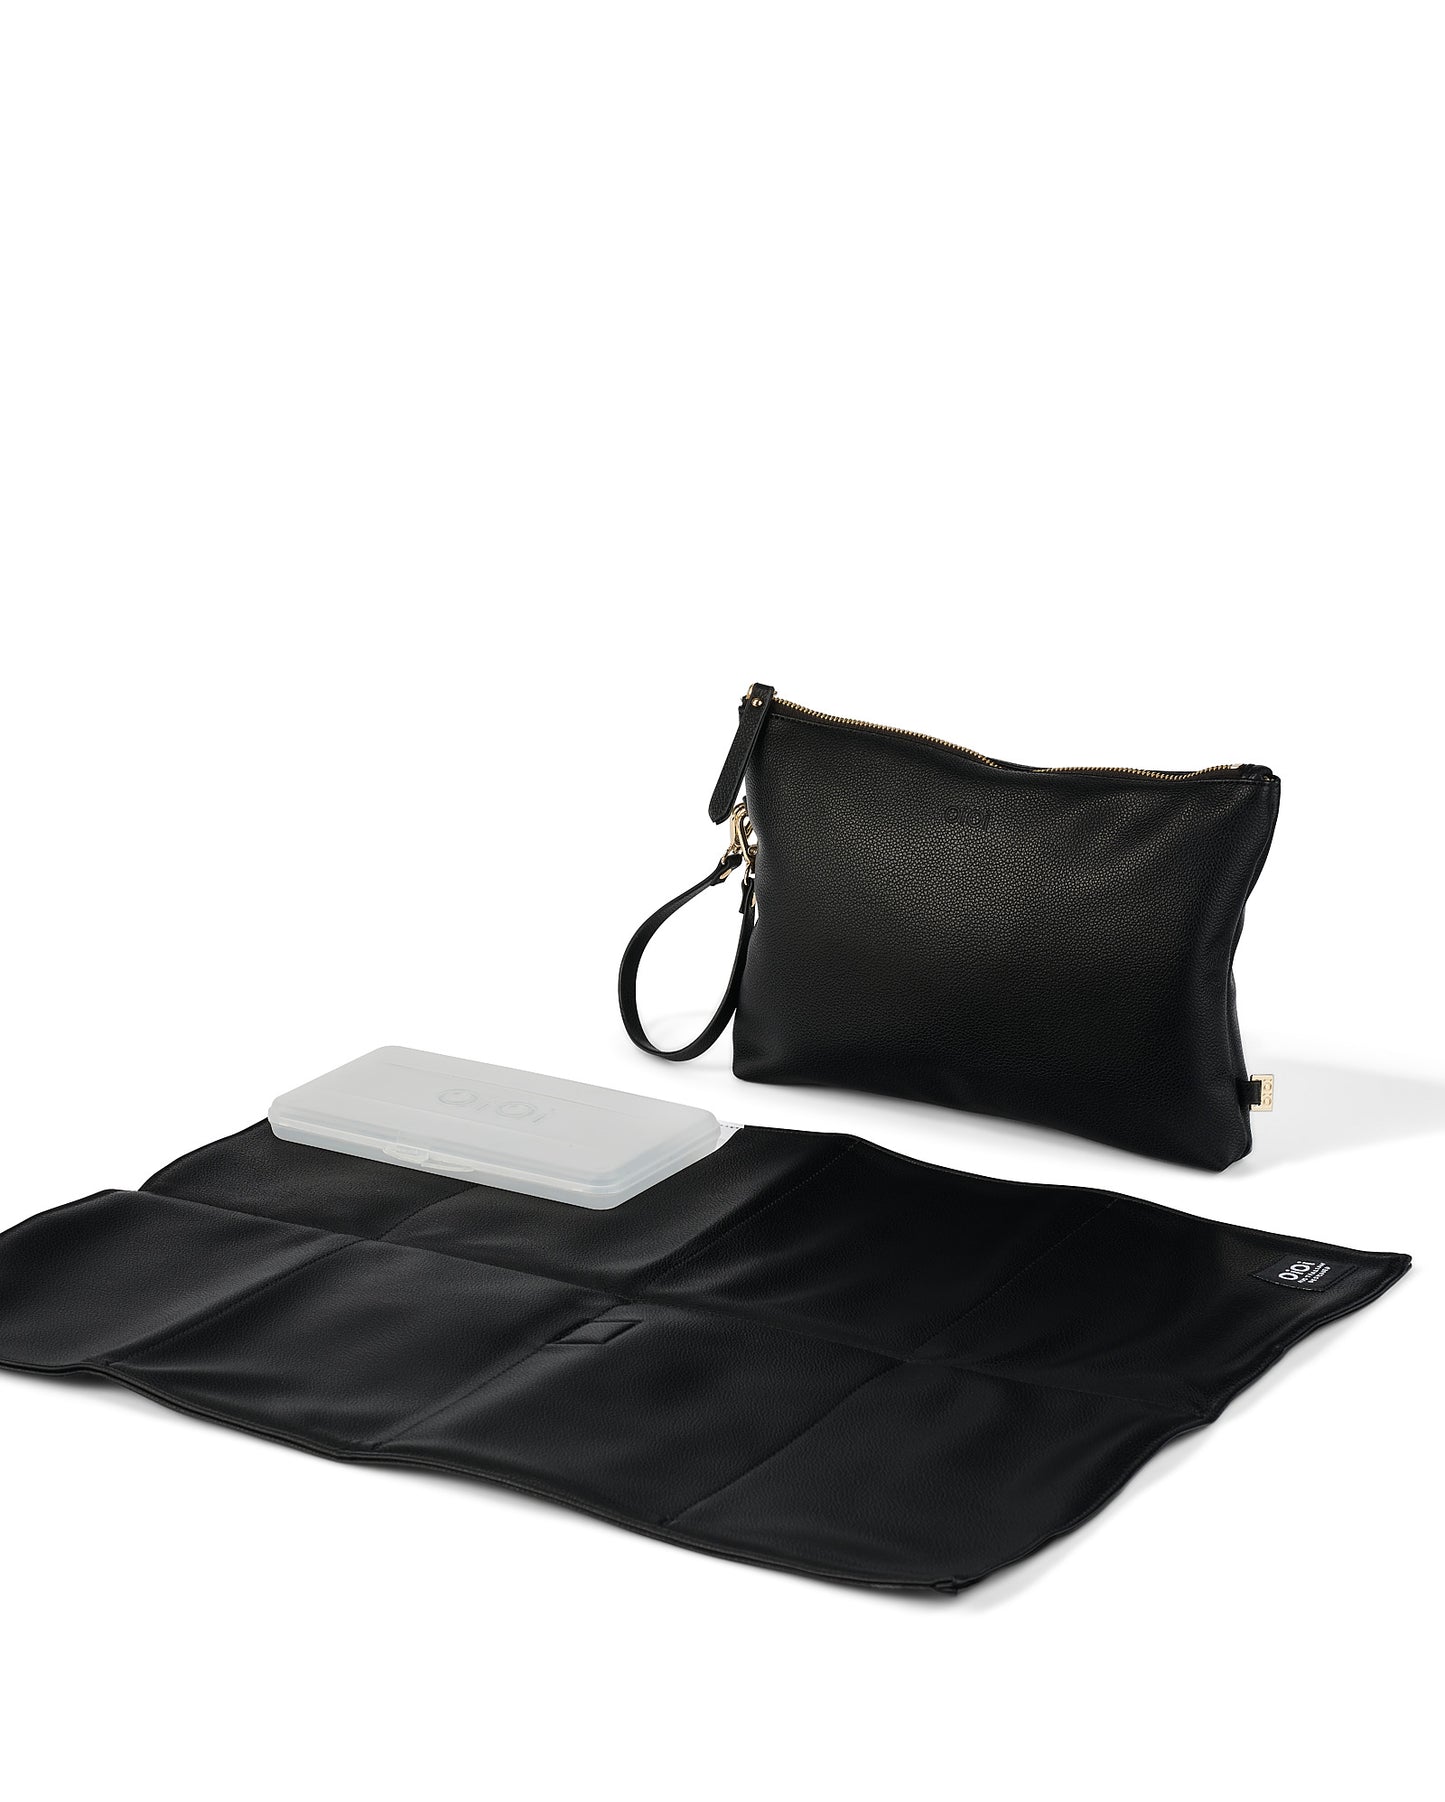 OiOi Nappy Changing Pouch Black Faux Leather